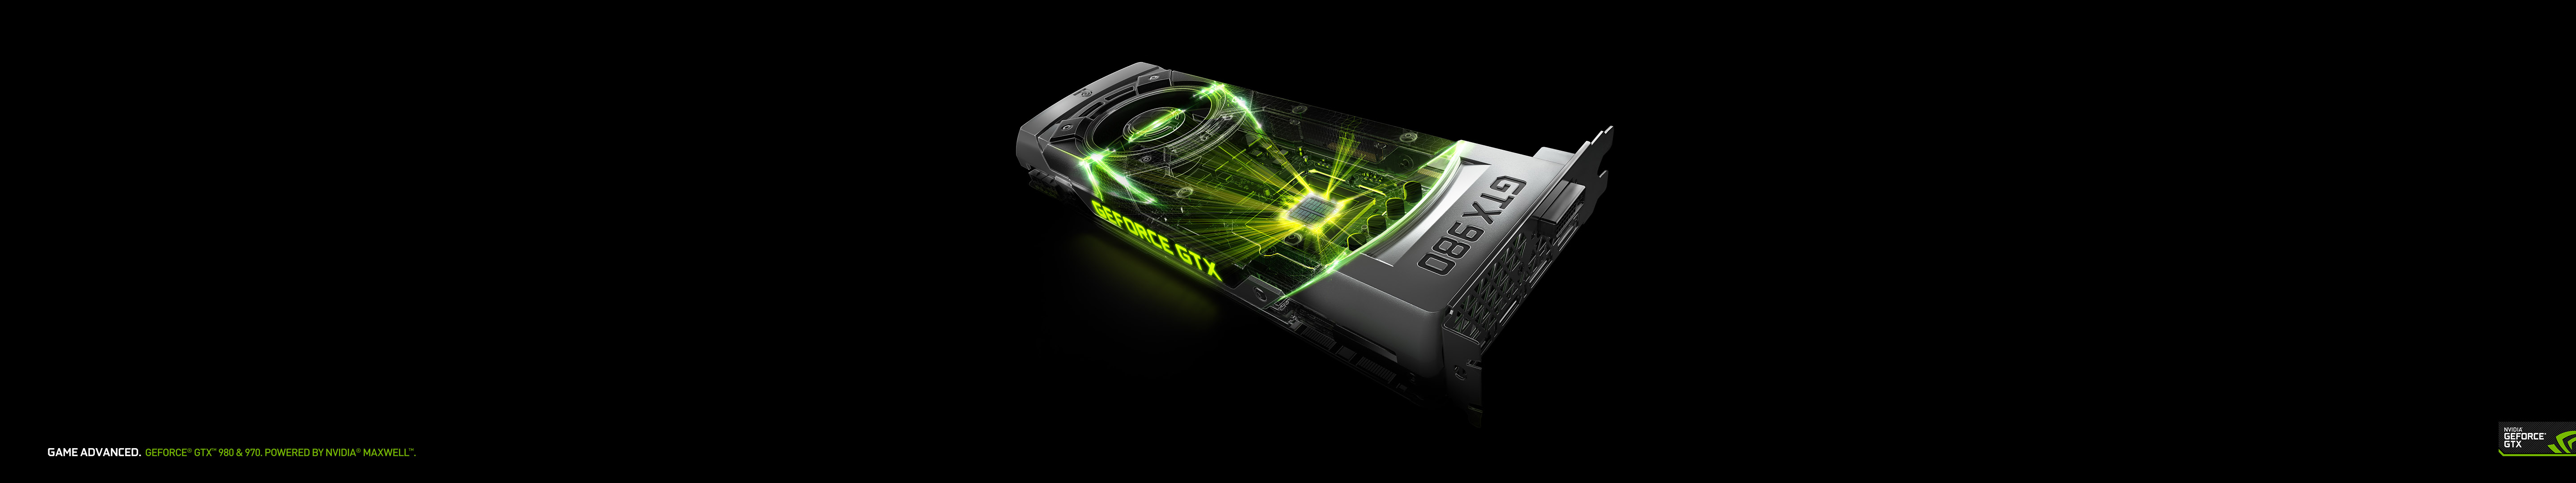 Geforce Gtx And Game Advanced Wallpaper